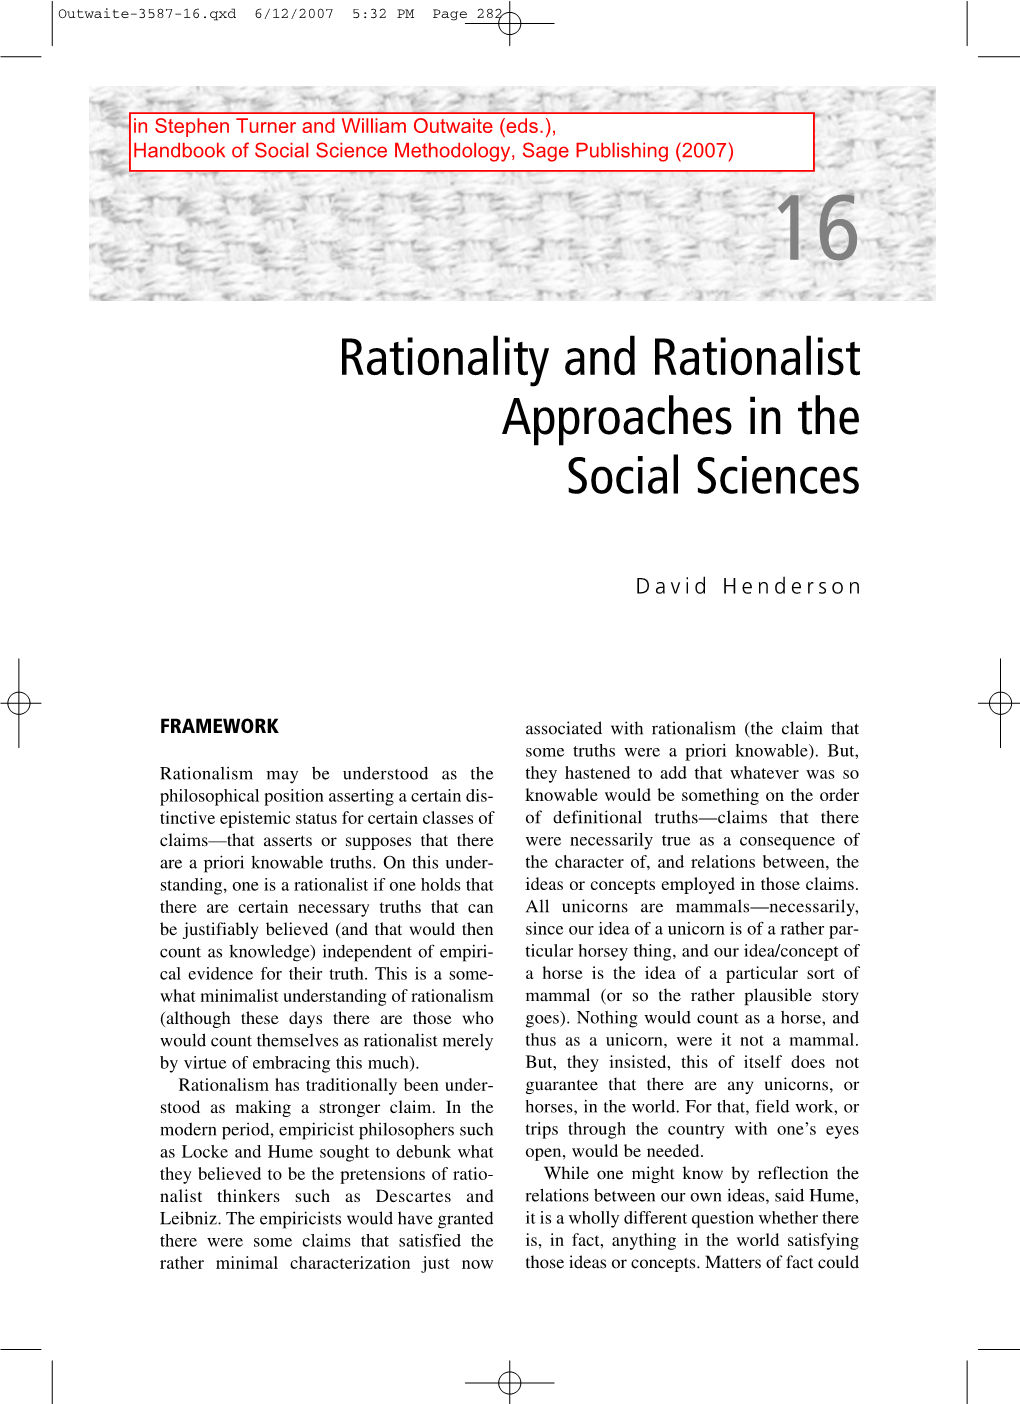 Rationality and Rationalist Approaches in the Social Sciences